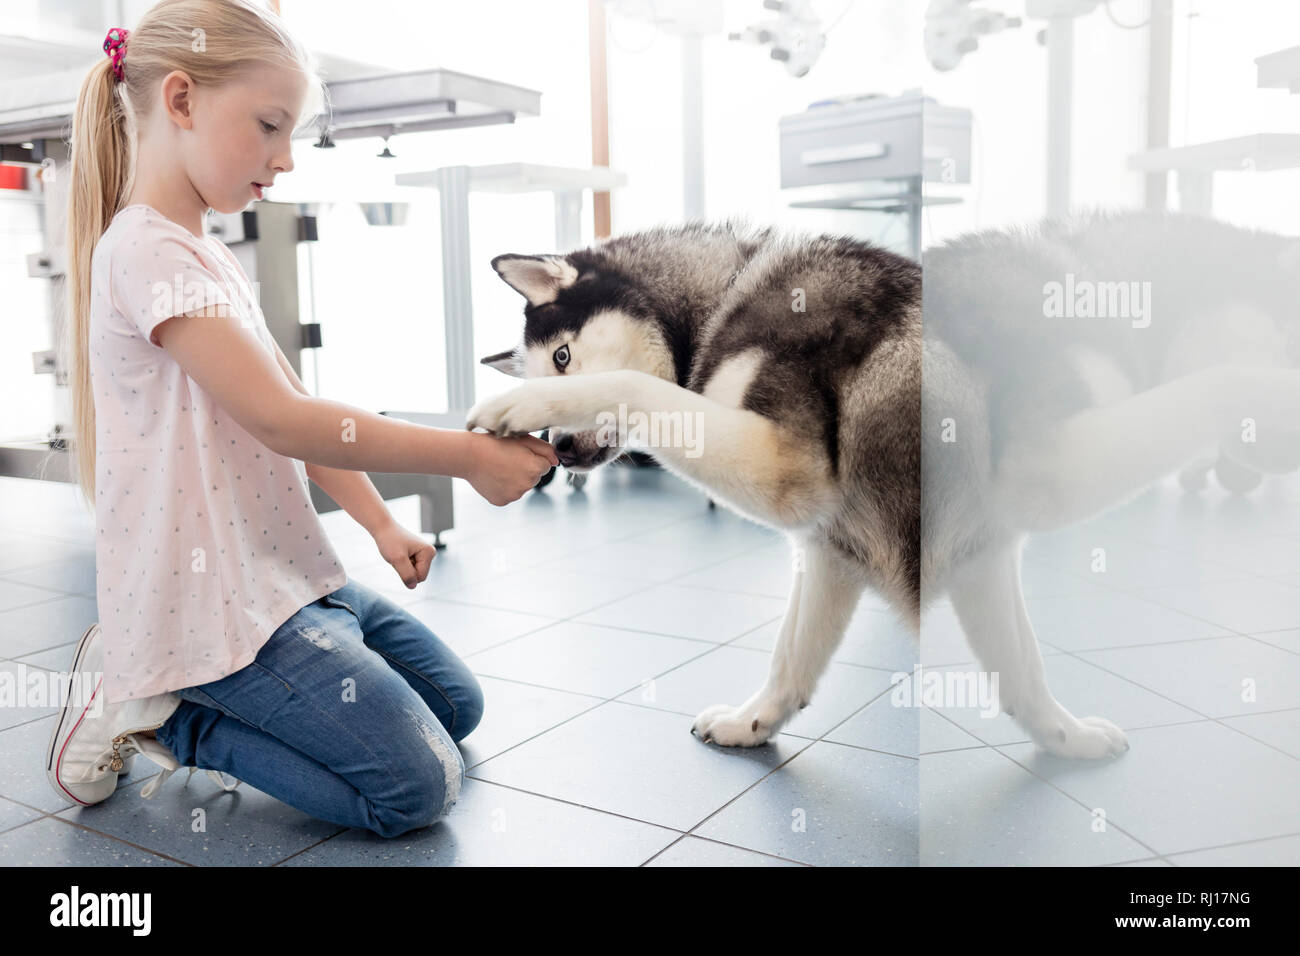 Girl kneeling while playing with husky at veterinary clinic Stock Photo